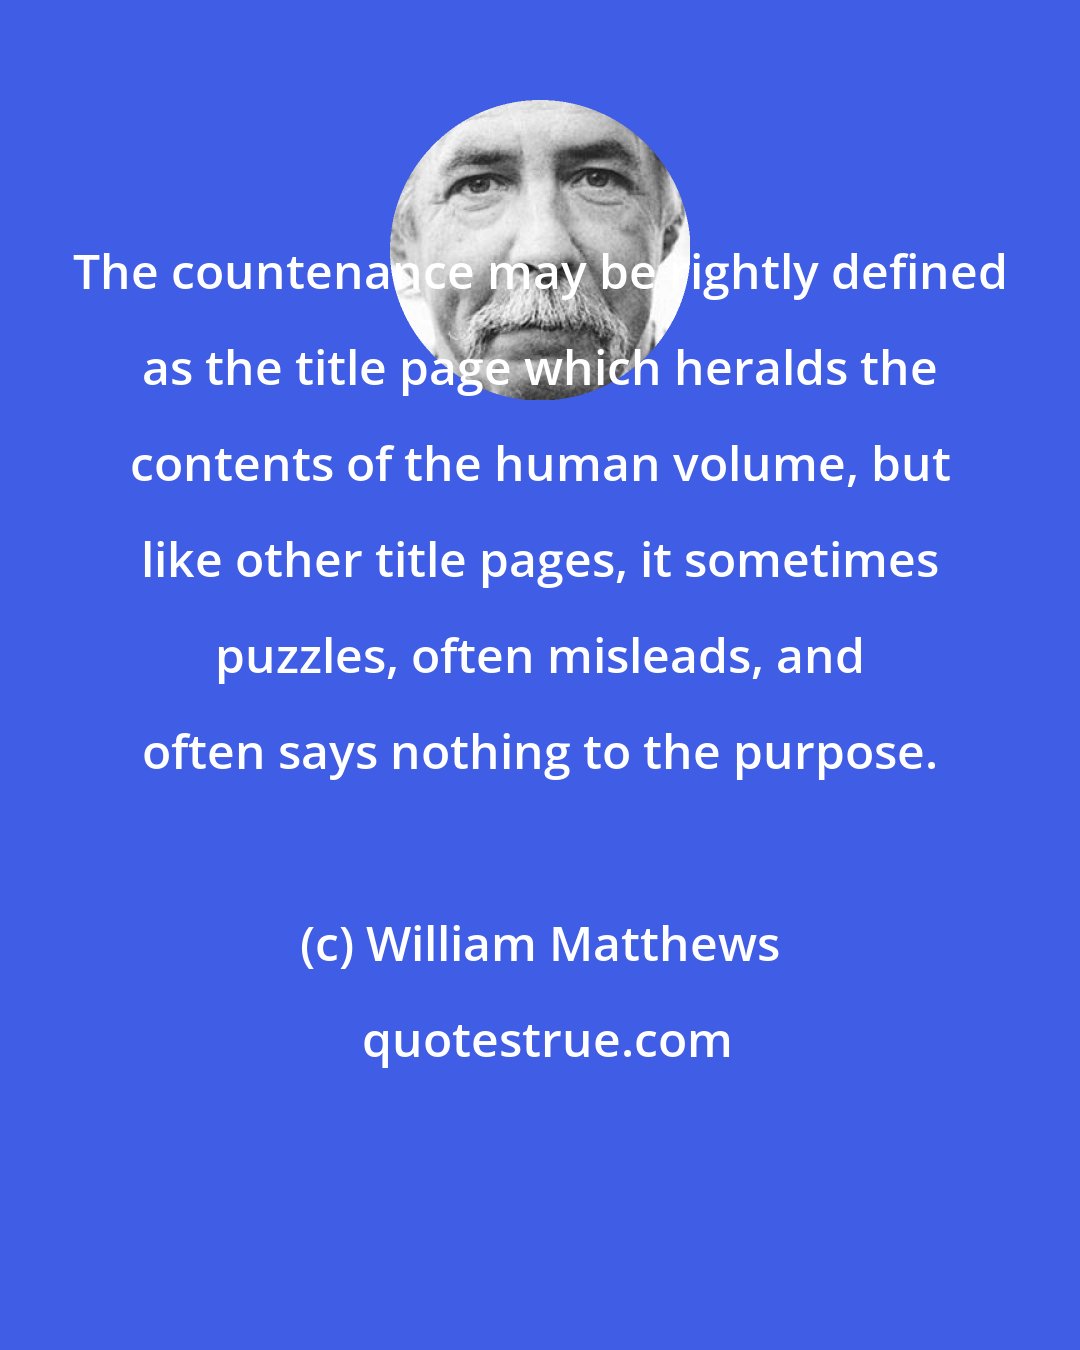 William Matthews: The countenance may be rightly defined as the title page which heralds the contents of the human volume, but like other title pages, it sometimes puzzles, often misleads, and often says nothing to the purpose.